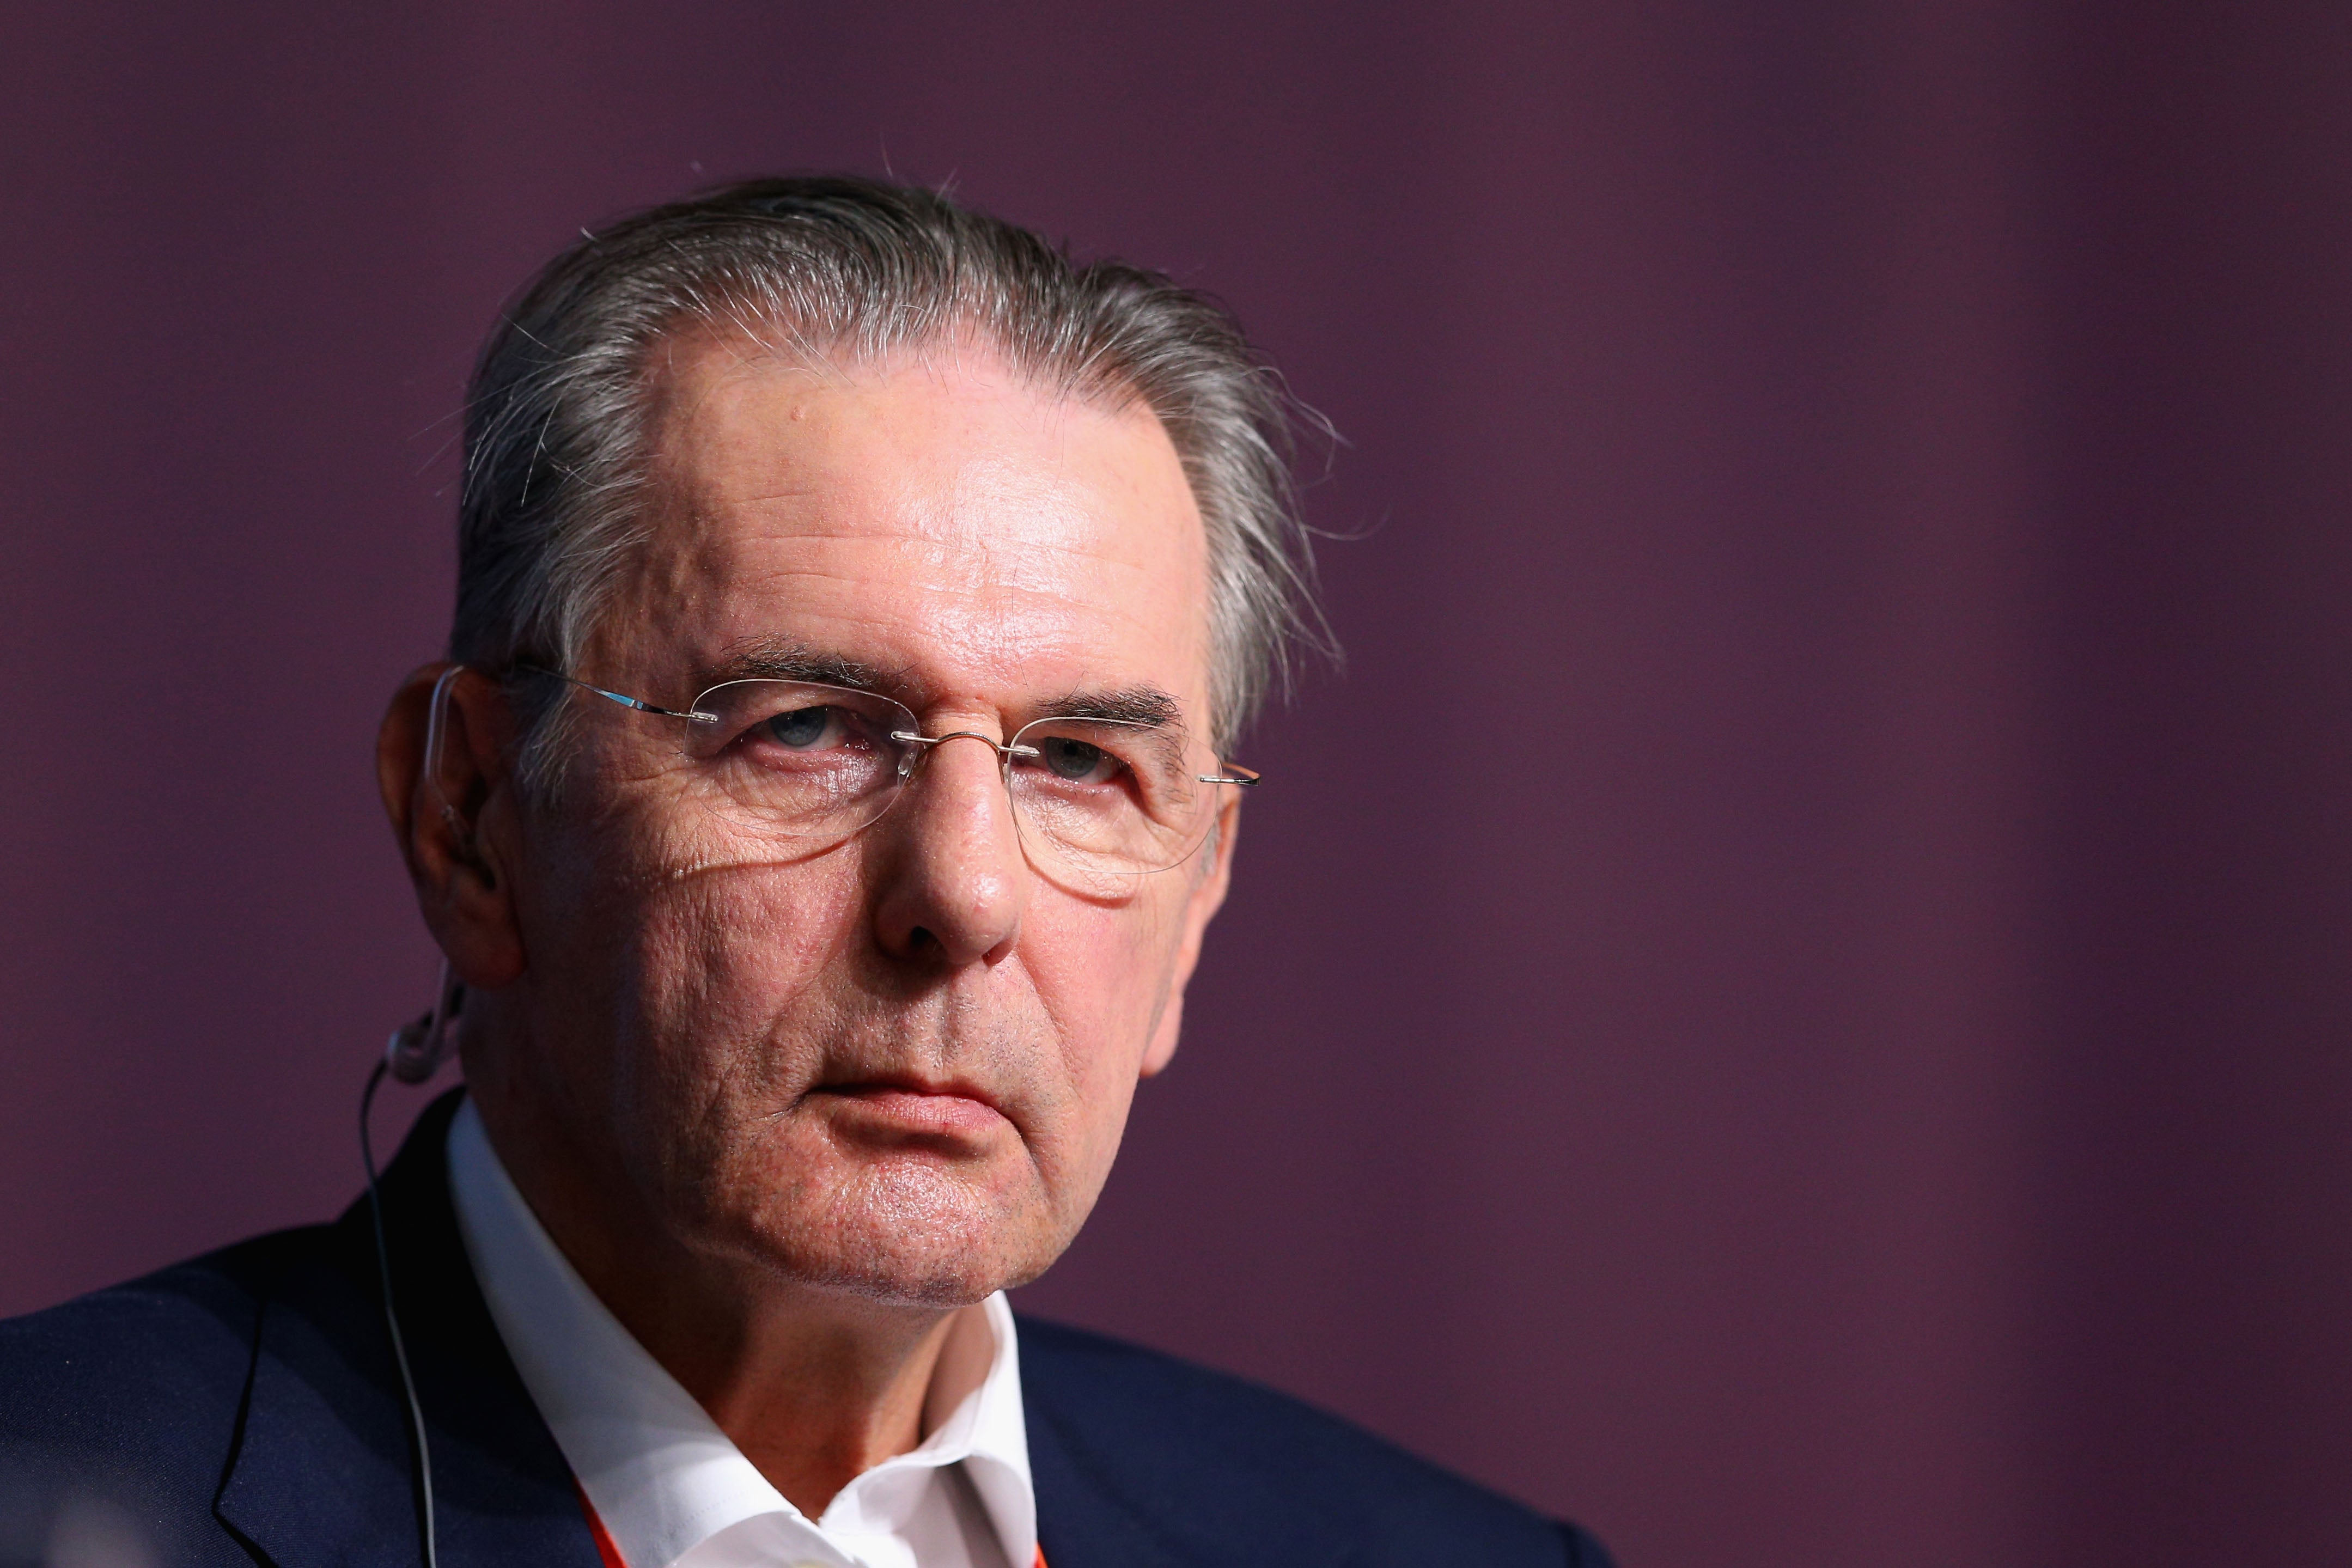 Rogge retired from medicine and was appointed as the eighth president of the IOC in 2001